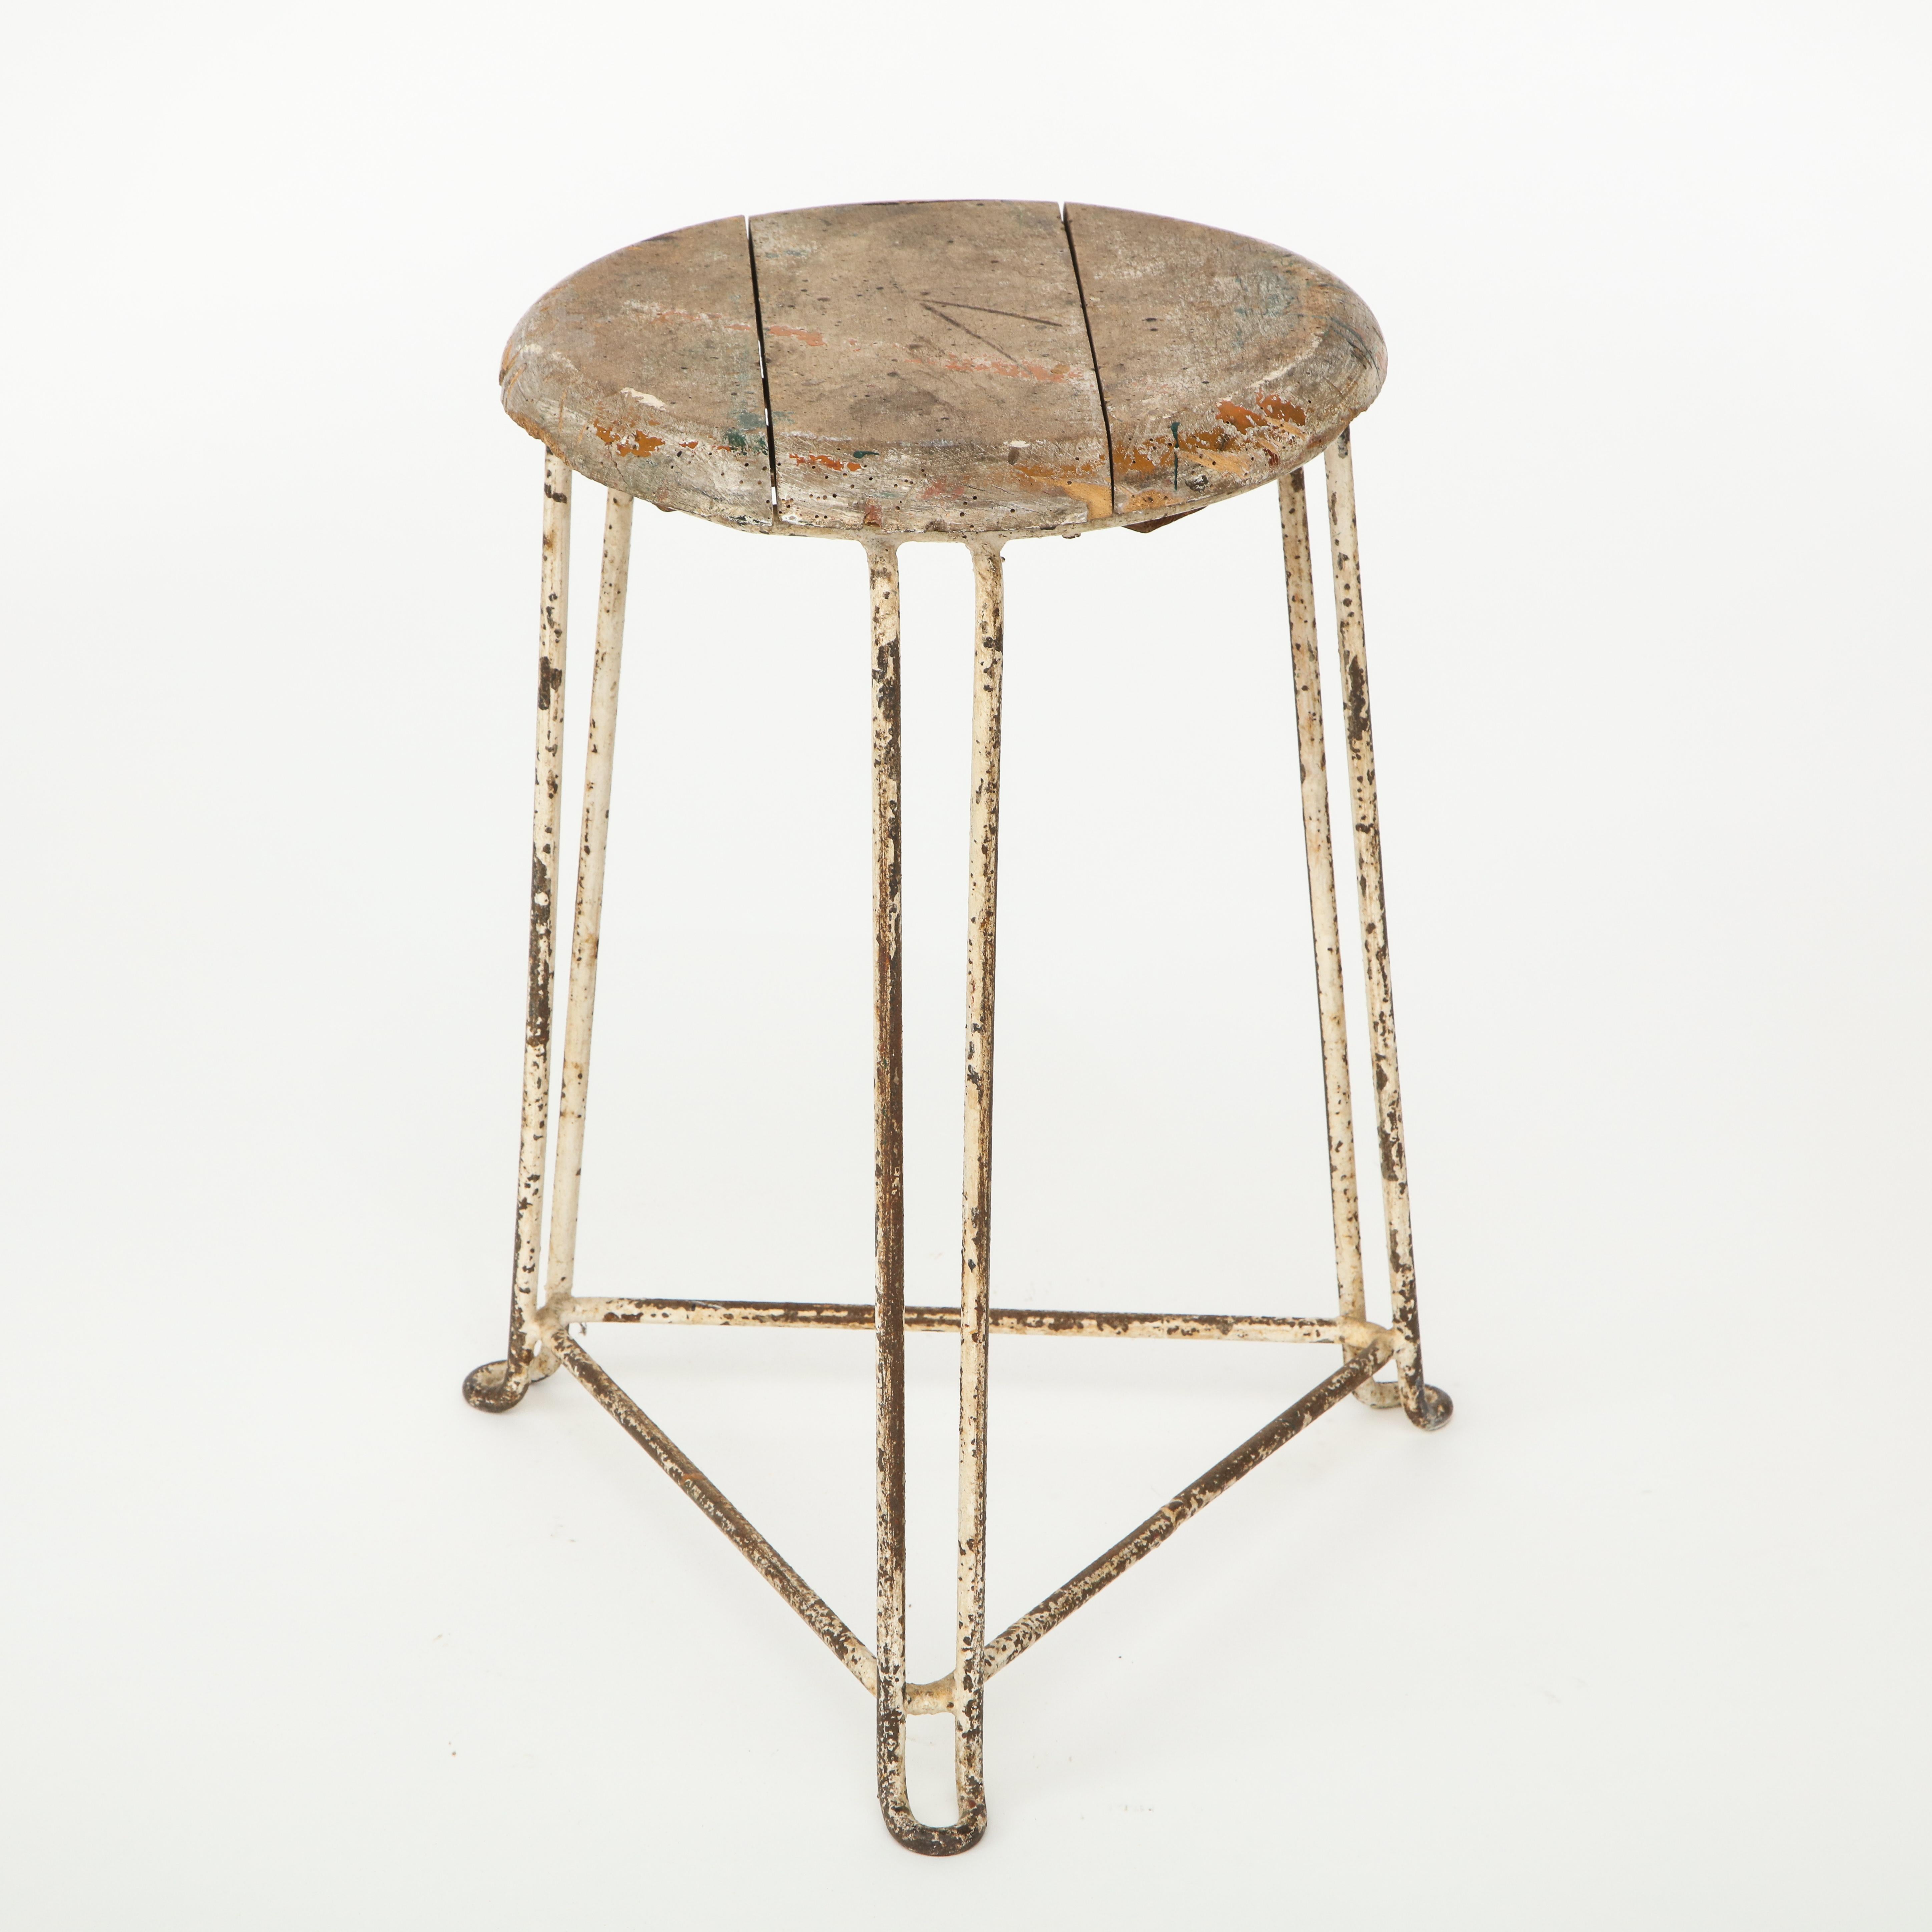 Wood and Metal Modern Industrial Vintage Stool, Heavy Patina, Belgium 1940's In Fair Condition For Sale In New York, NY